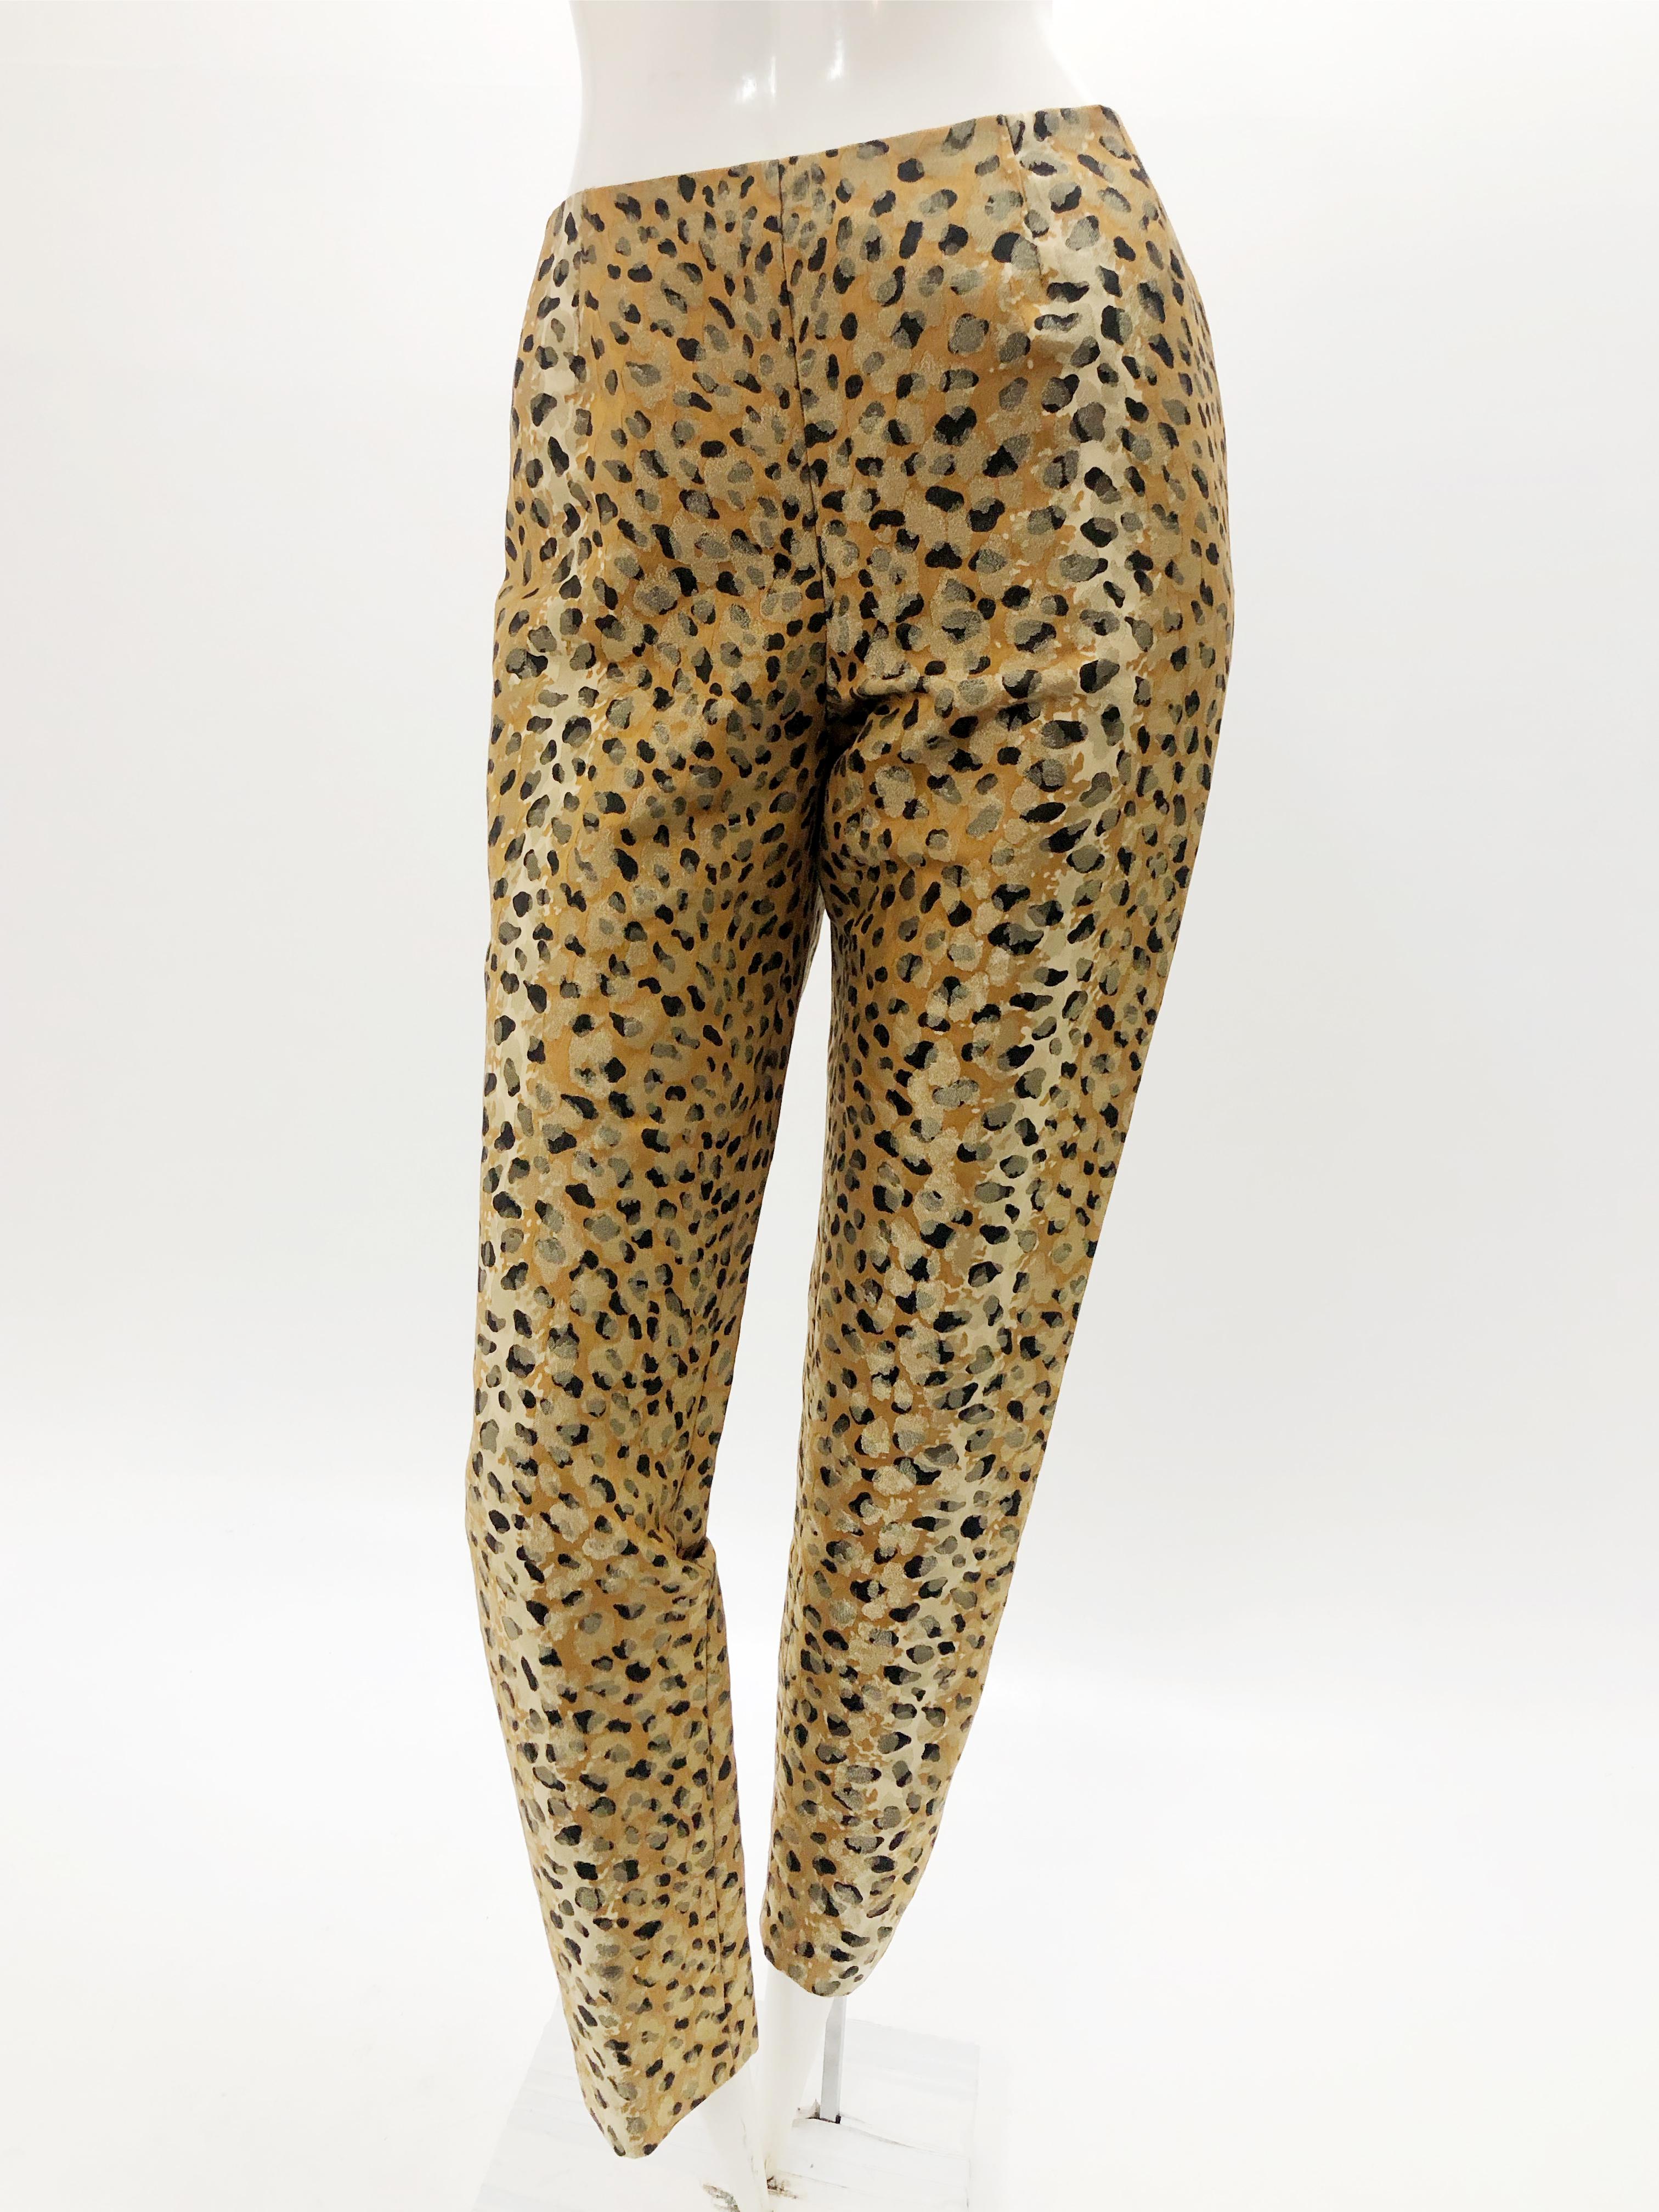 A spectacular 1980s Bill Blass leopard patterned silk lamé cigarette pant. Very fitted and lean. Center back zipper. Pants fit a US size medium/large. Escada jacket shown is sold separately.